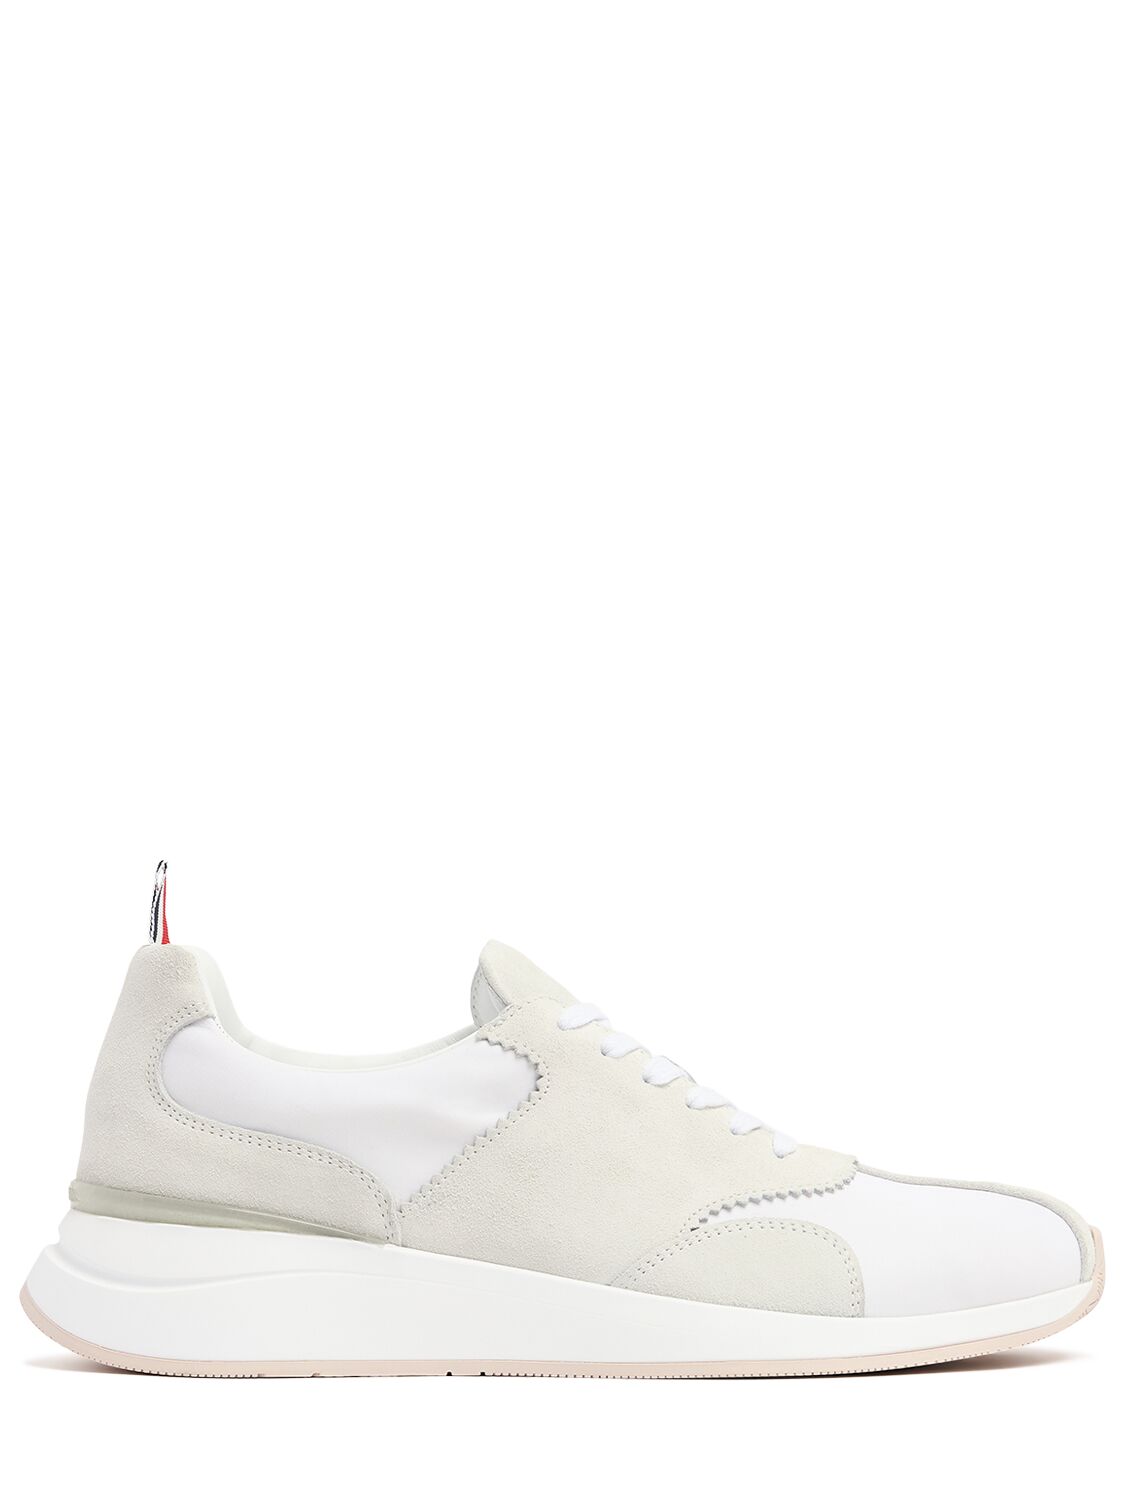 Thom Browne Sprinter Tech Low Top Sneakers In White